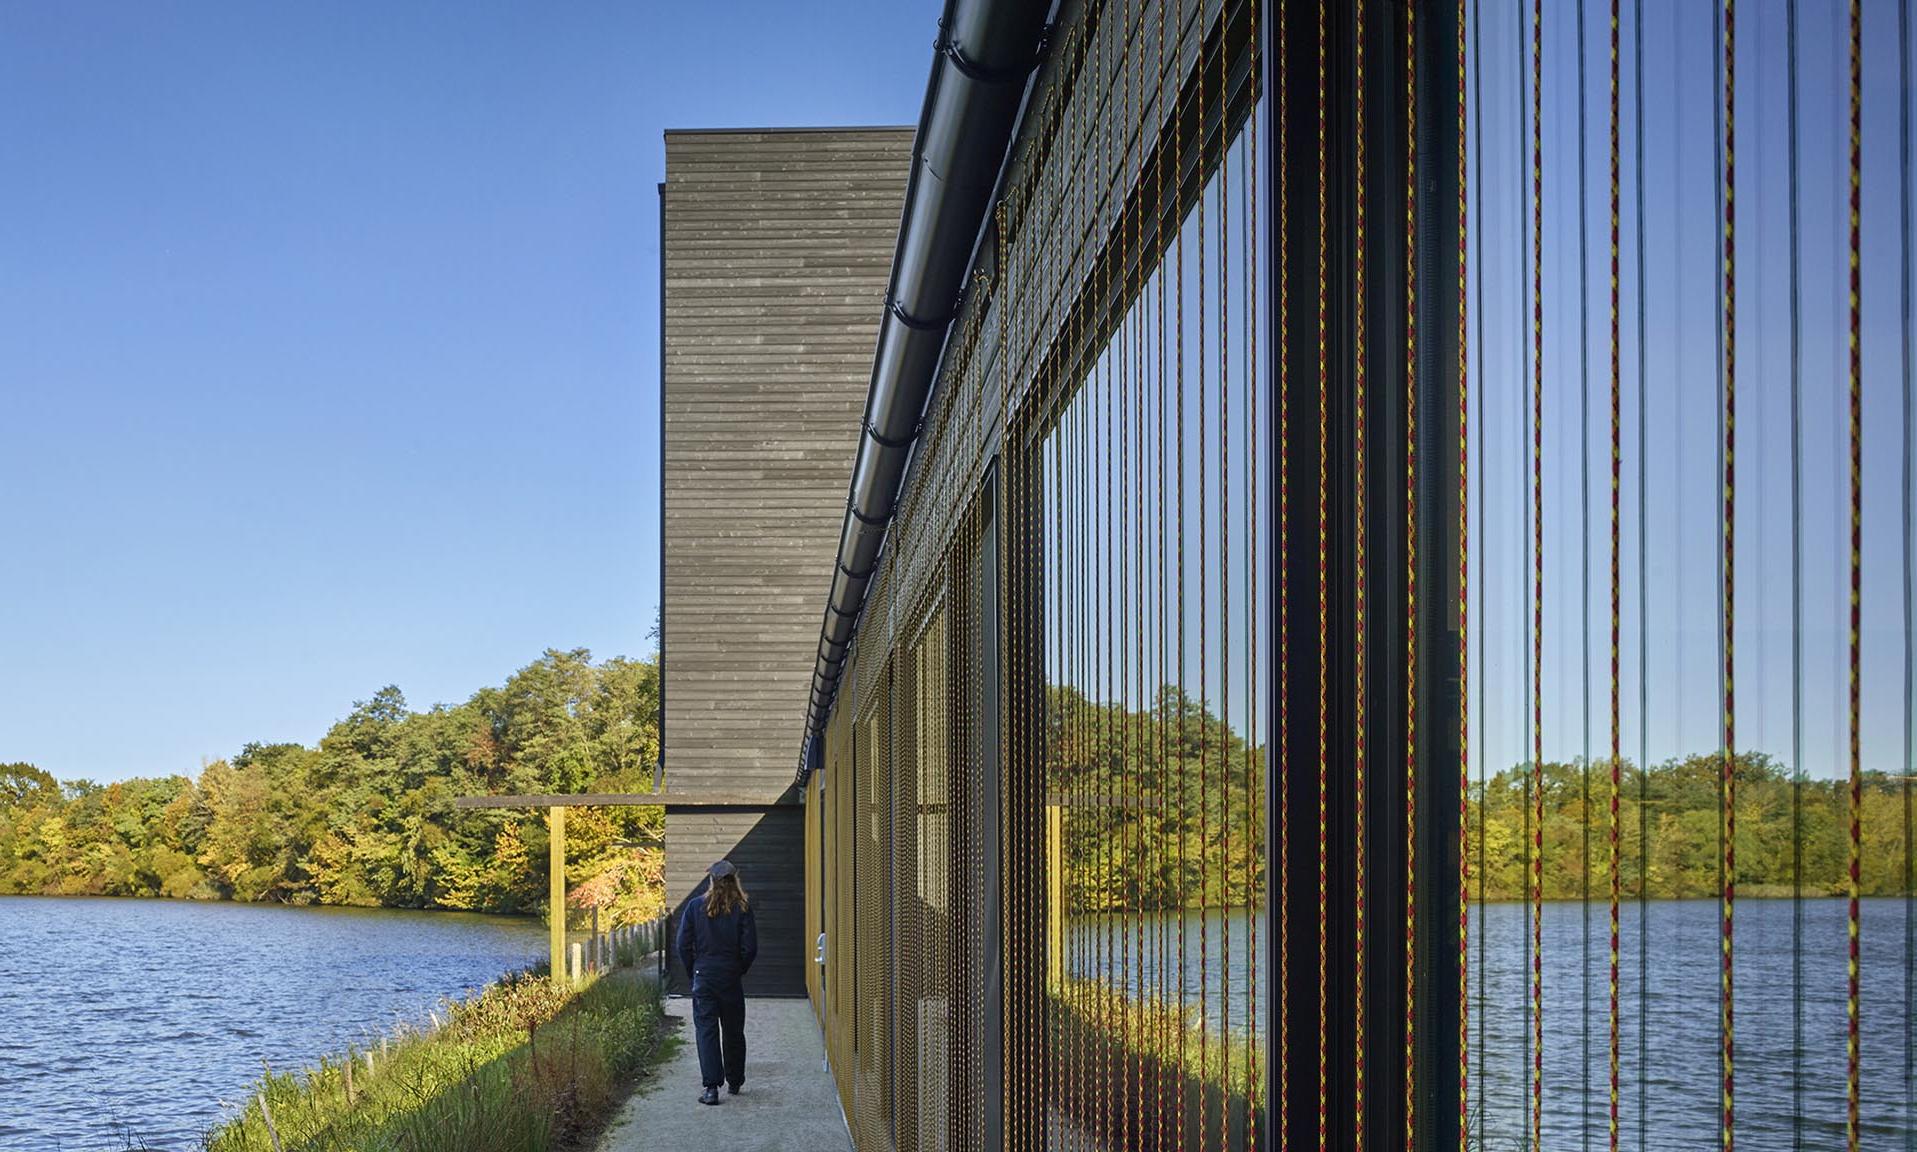 The Discovery Center walkway by water